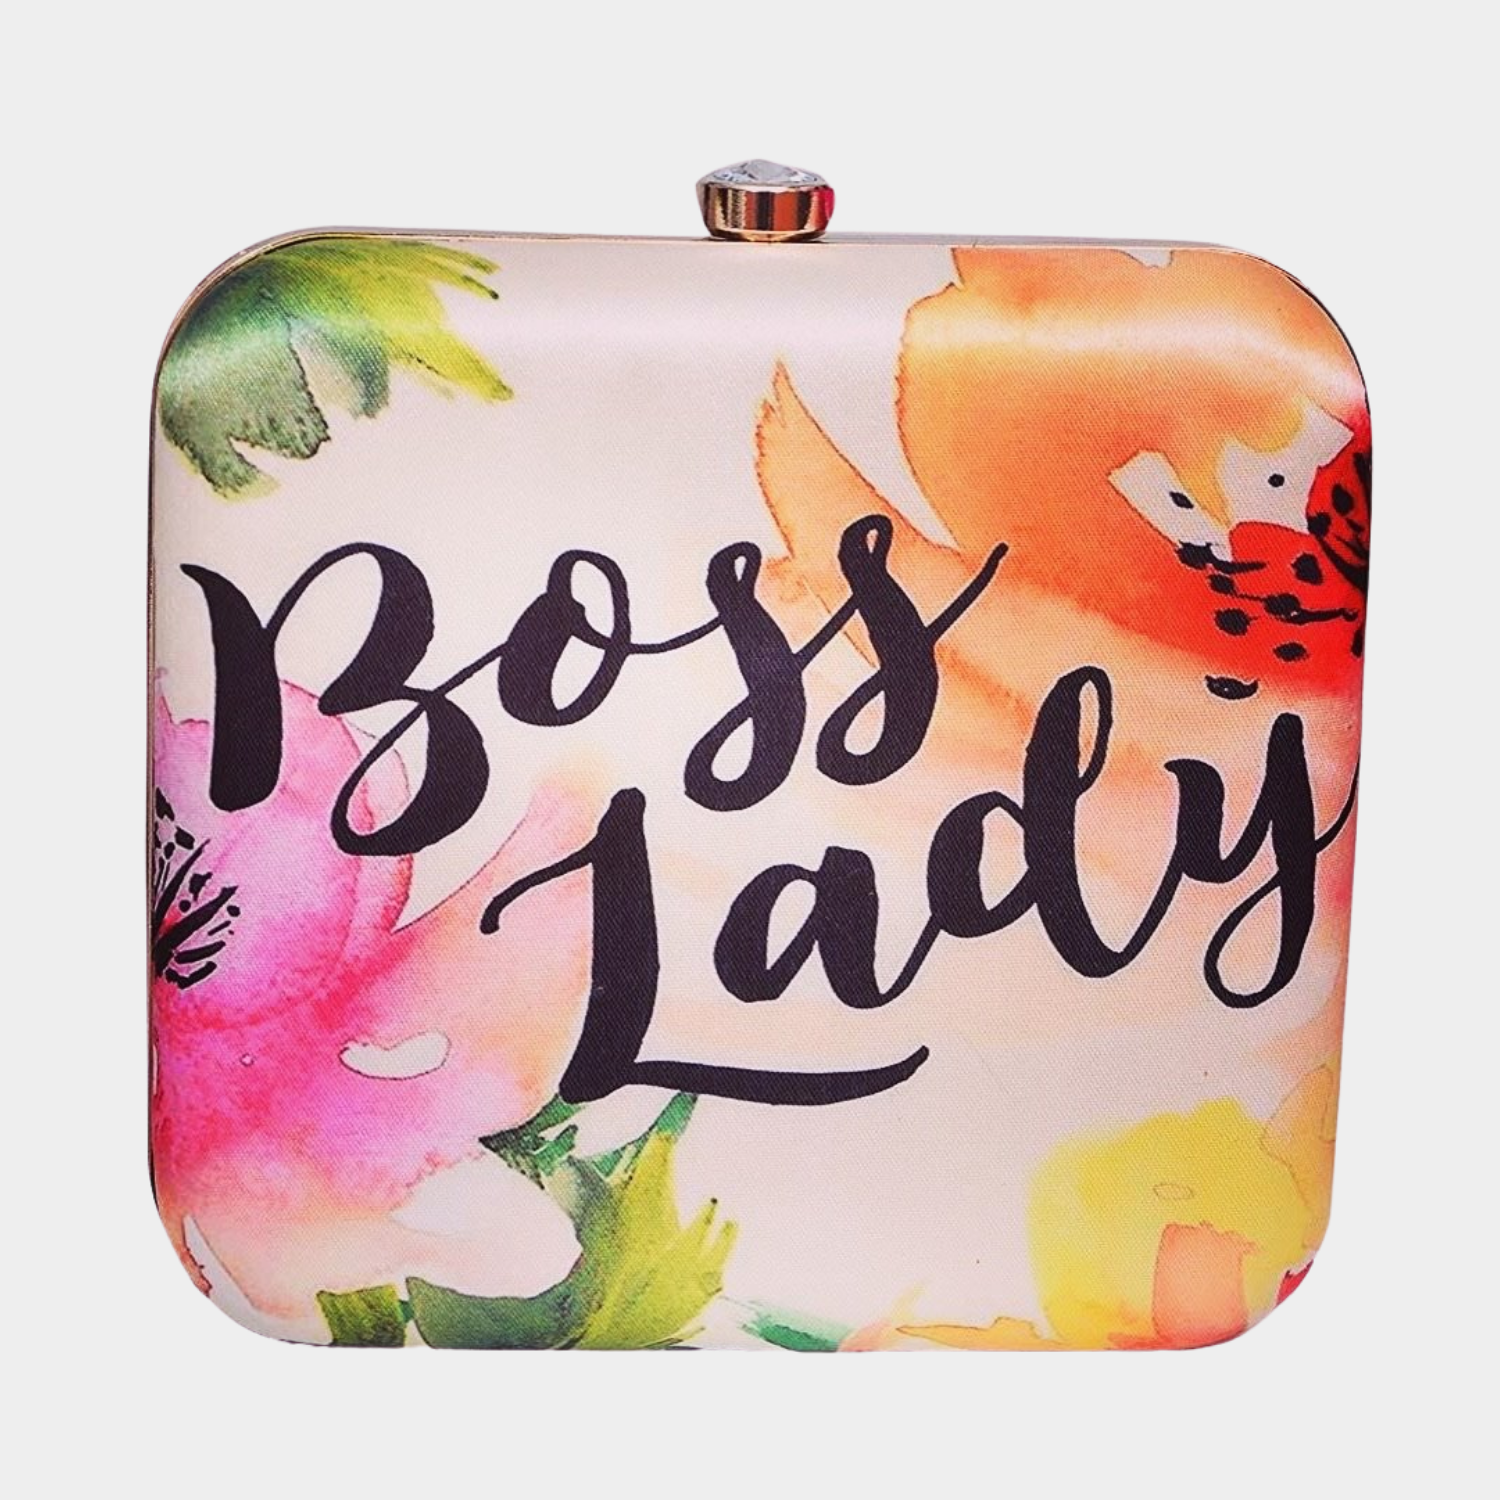 BOSSY, a product by Clutcheeet